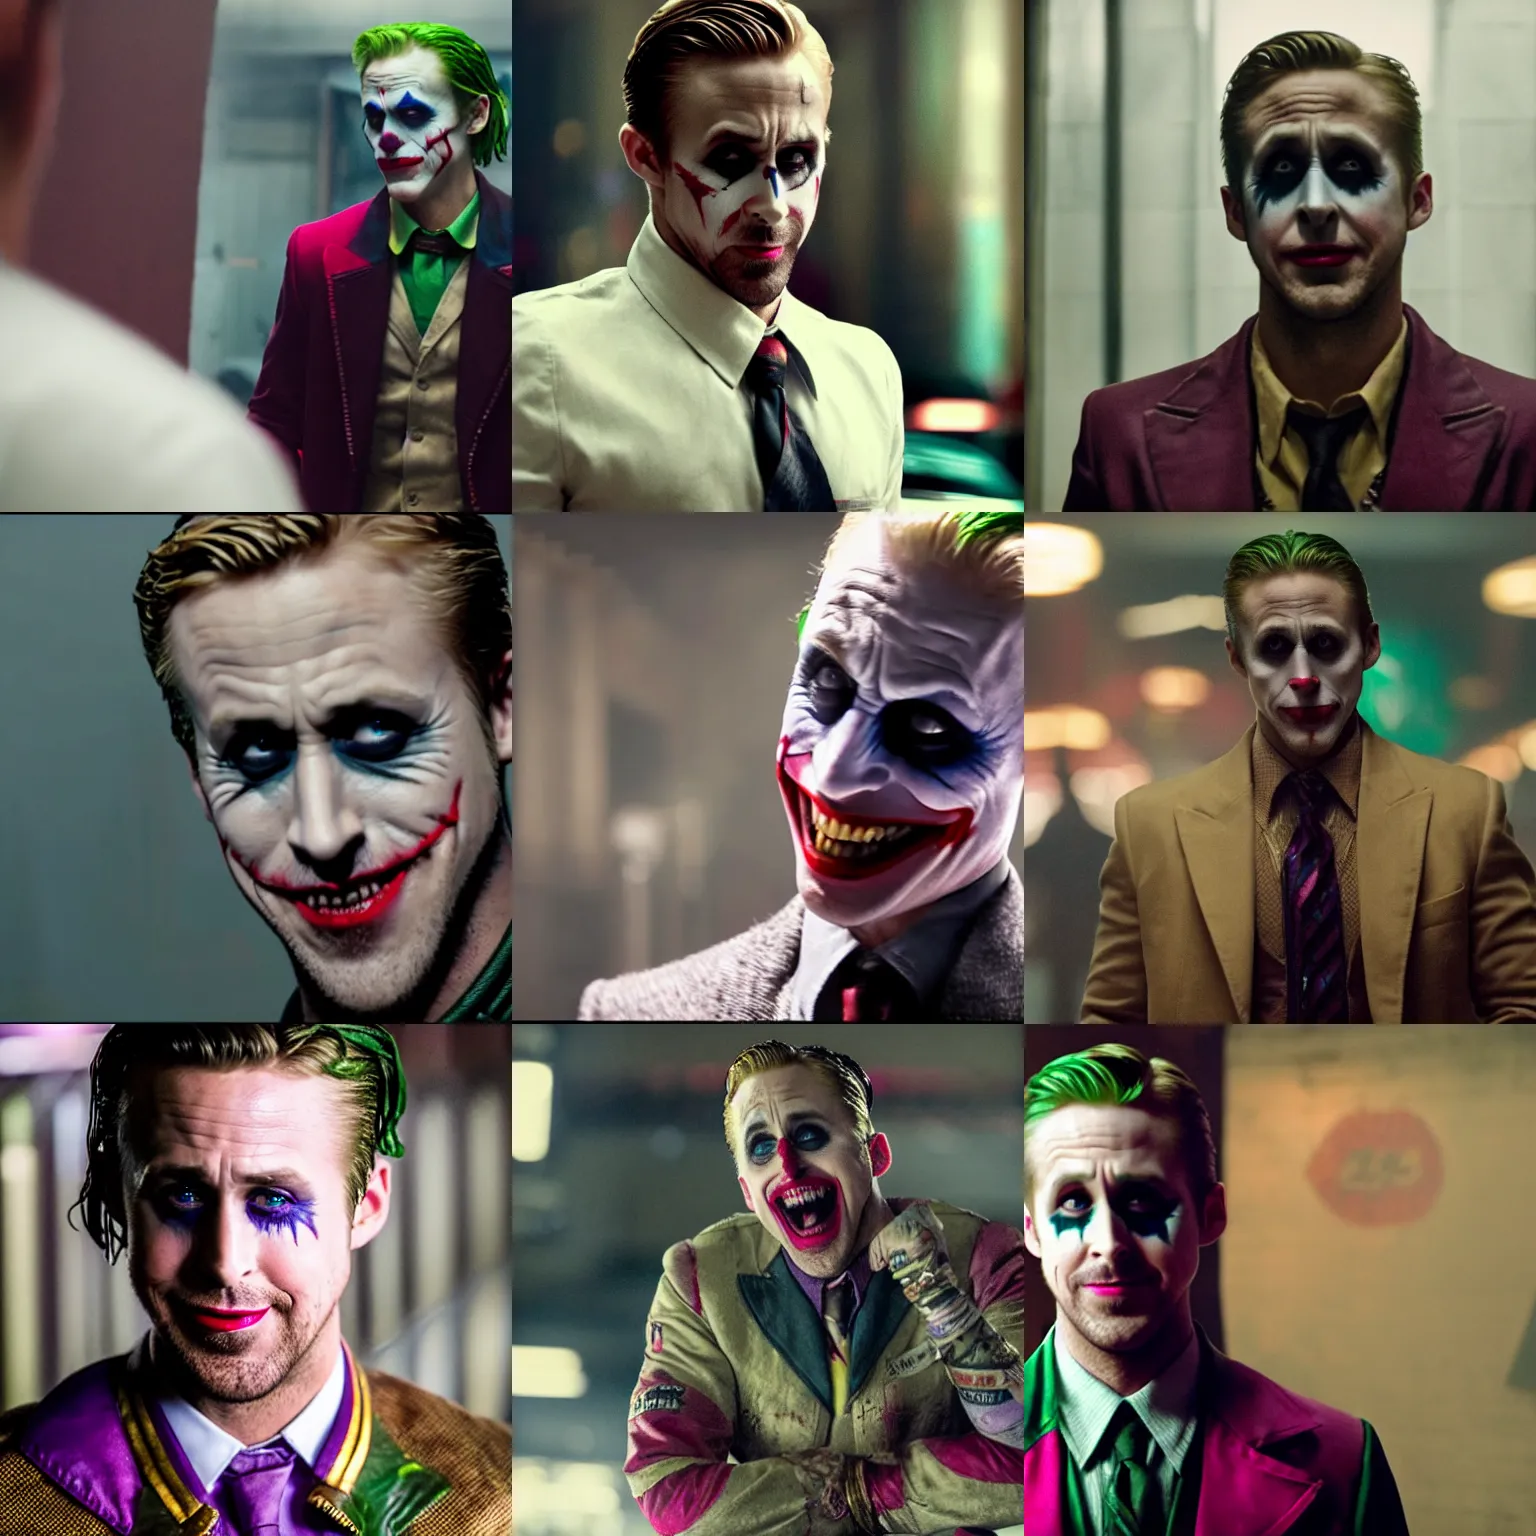 Prompt: ryan gosling as the joker in suicide squad ( 2 0 1 6 ) - w 8 5 4 directed by david ayer, cinematography by roman vasyanov, movie stills )